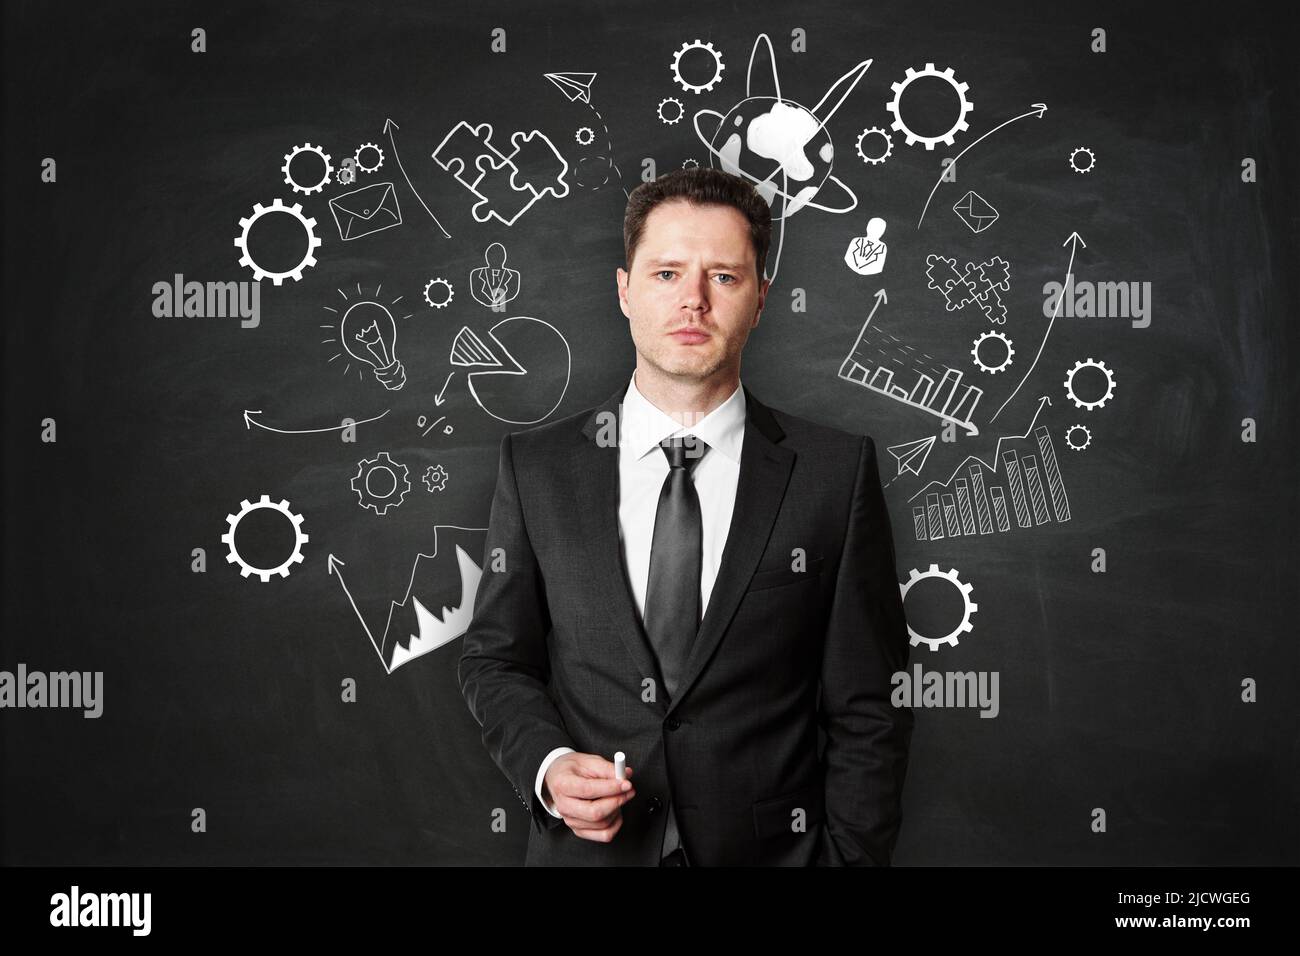 Business school education offline concept with teacher holding chalk in his hand on blackboard background with white handwritten puzzle, gears and arr Stock Photo